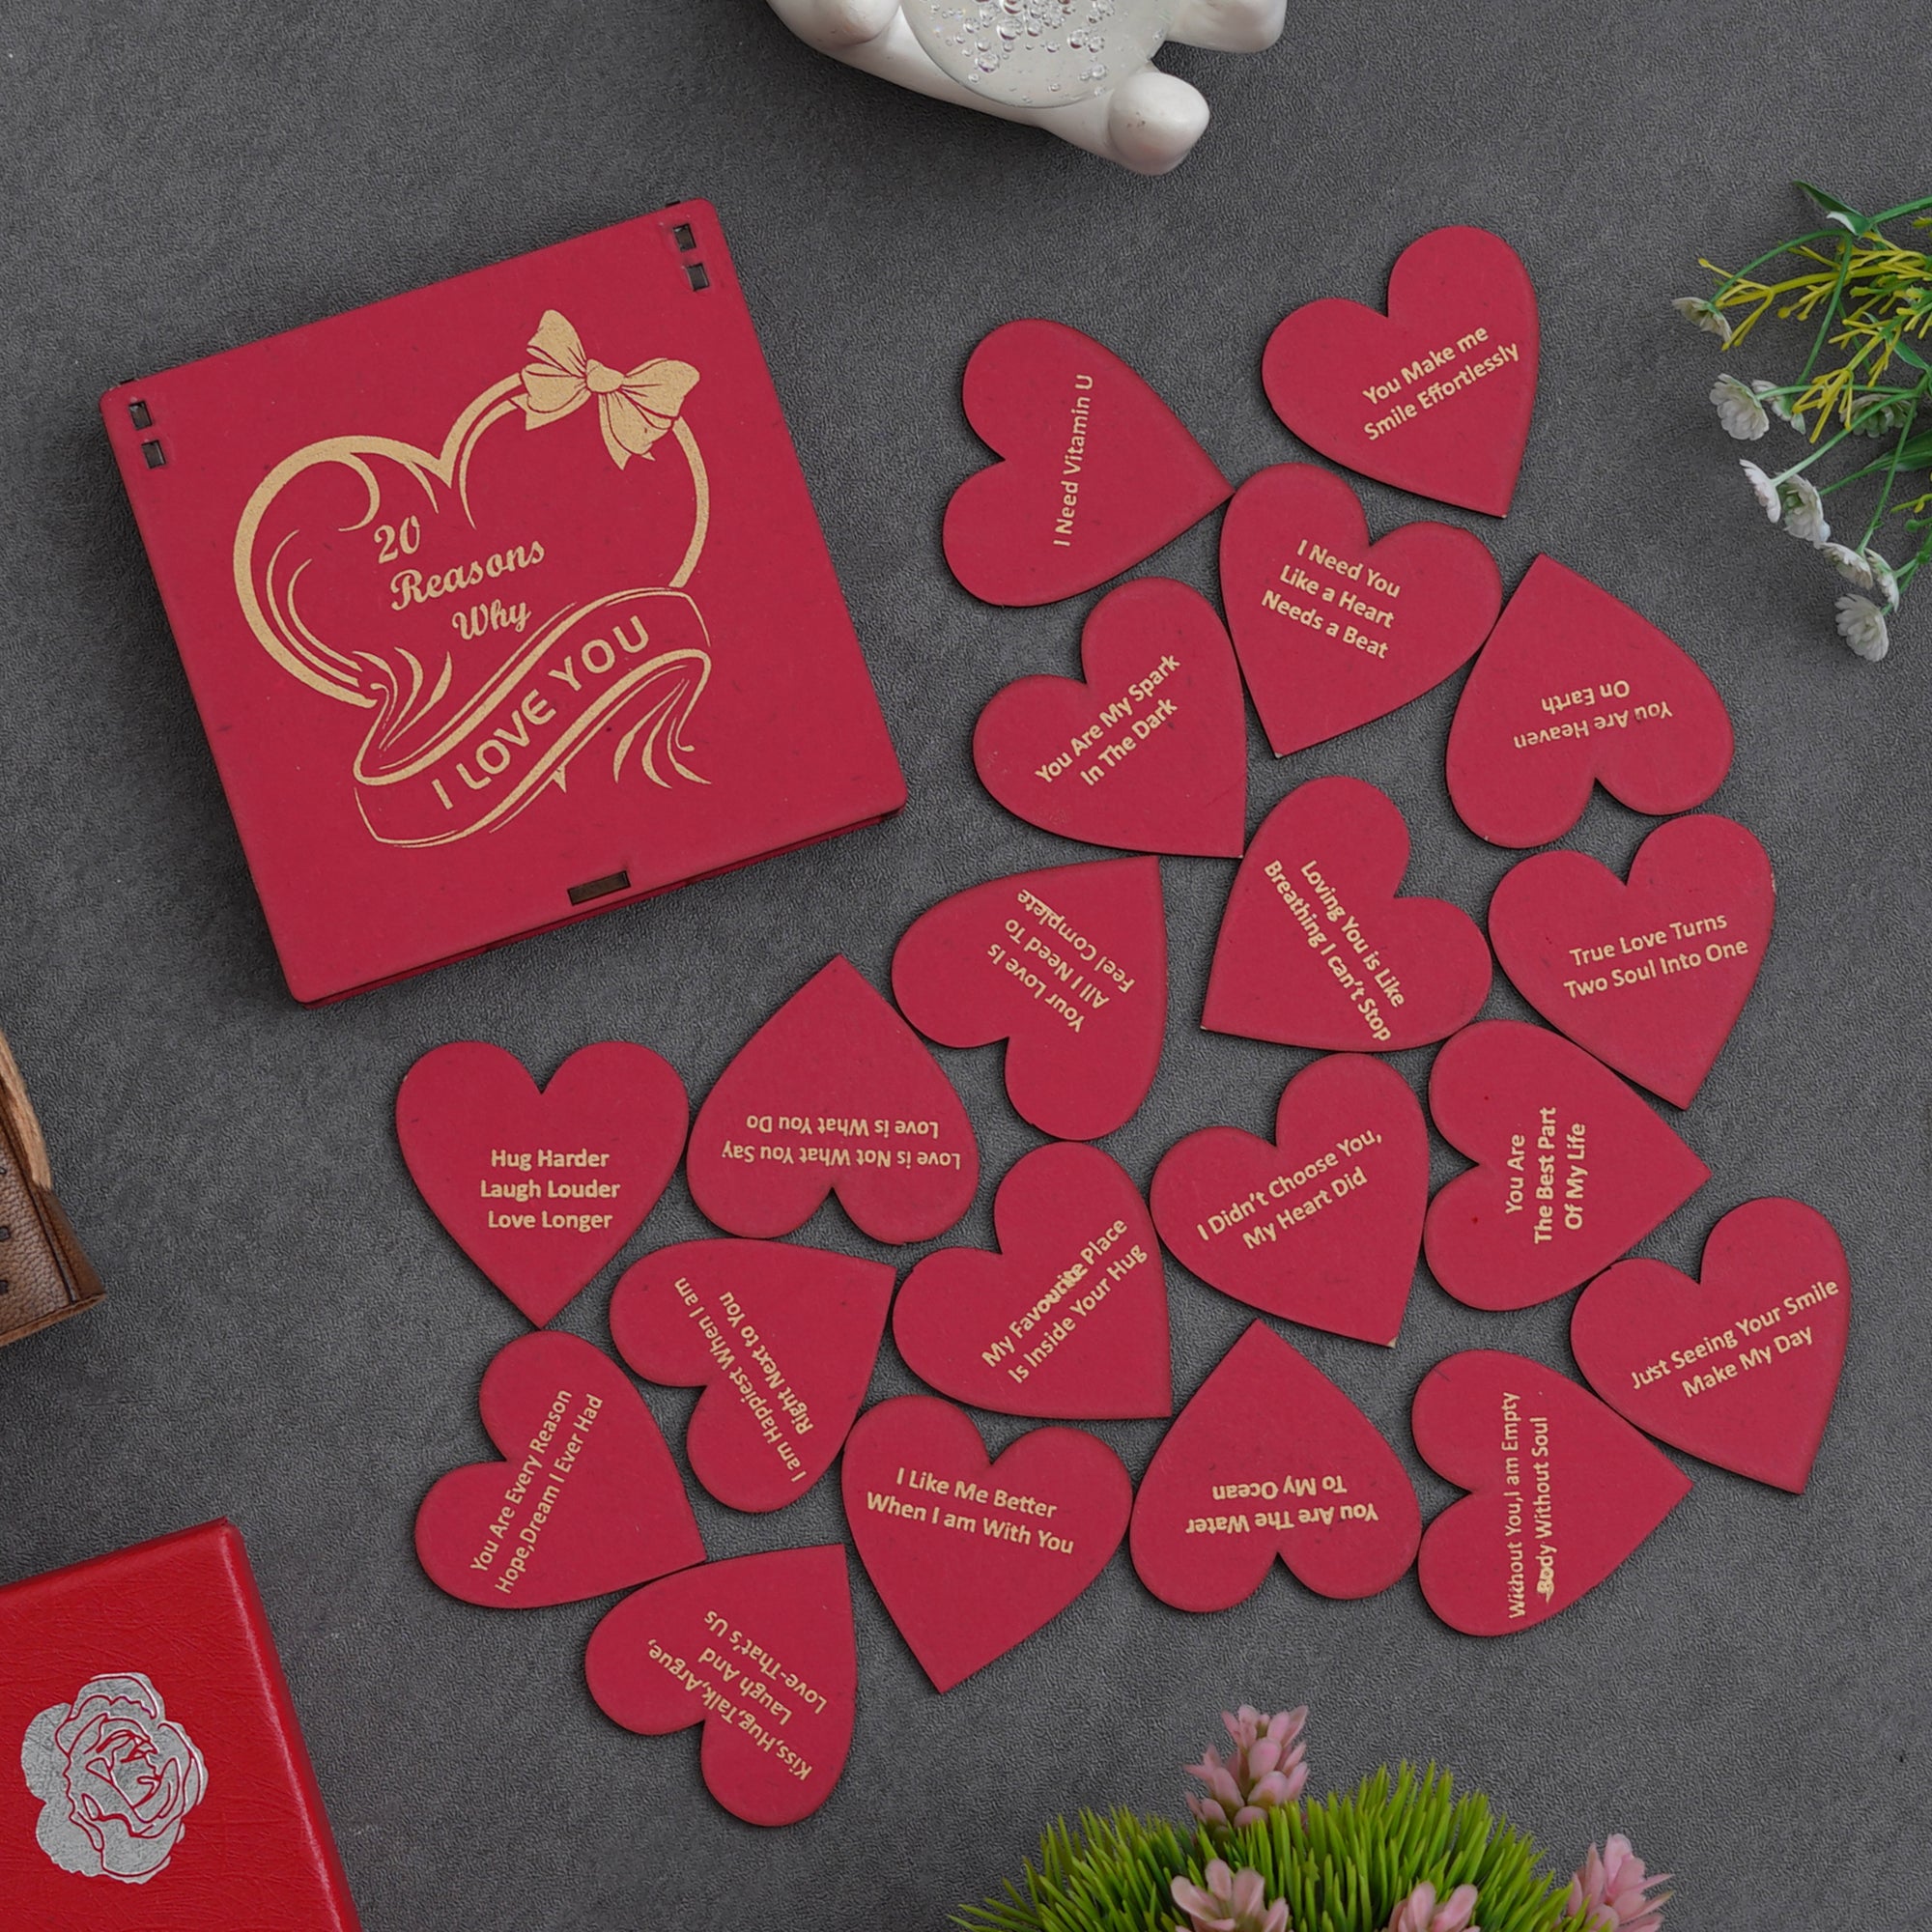 Valentine Combo of Pack of 8 Love Gift Cards, "20 Reasons Why I Love You" Printed on Little Red Hearts Decorative Wooden Gift Set Box 3